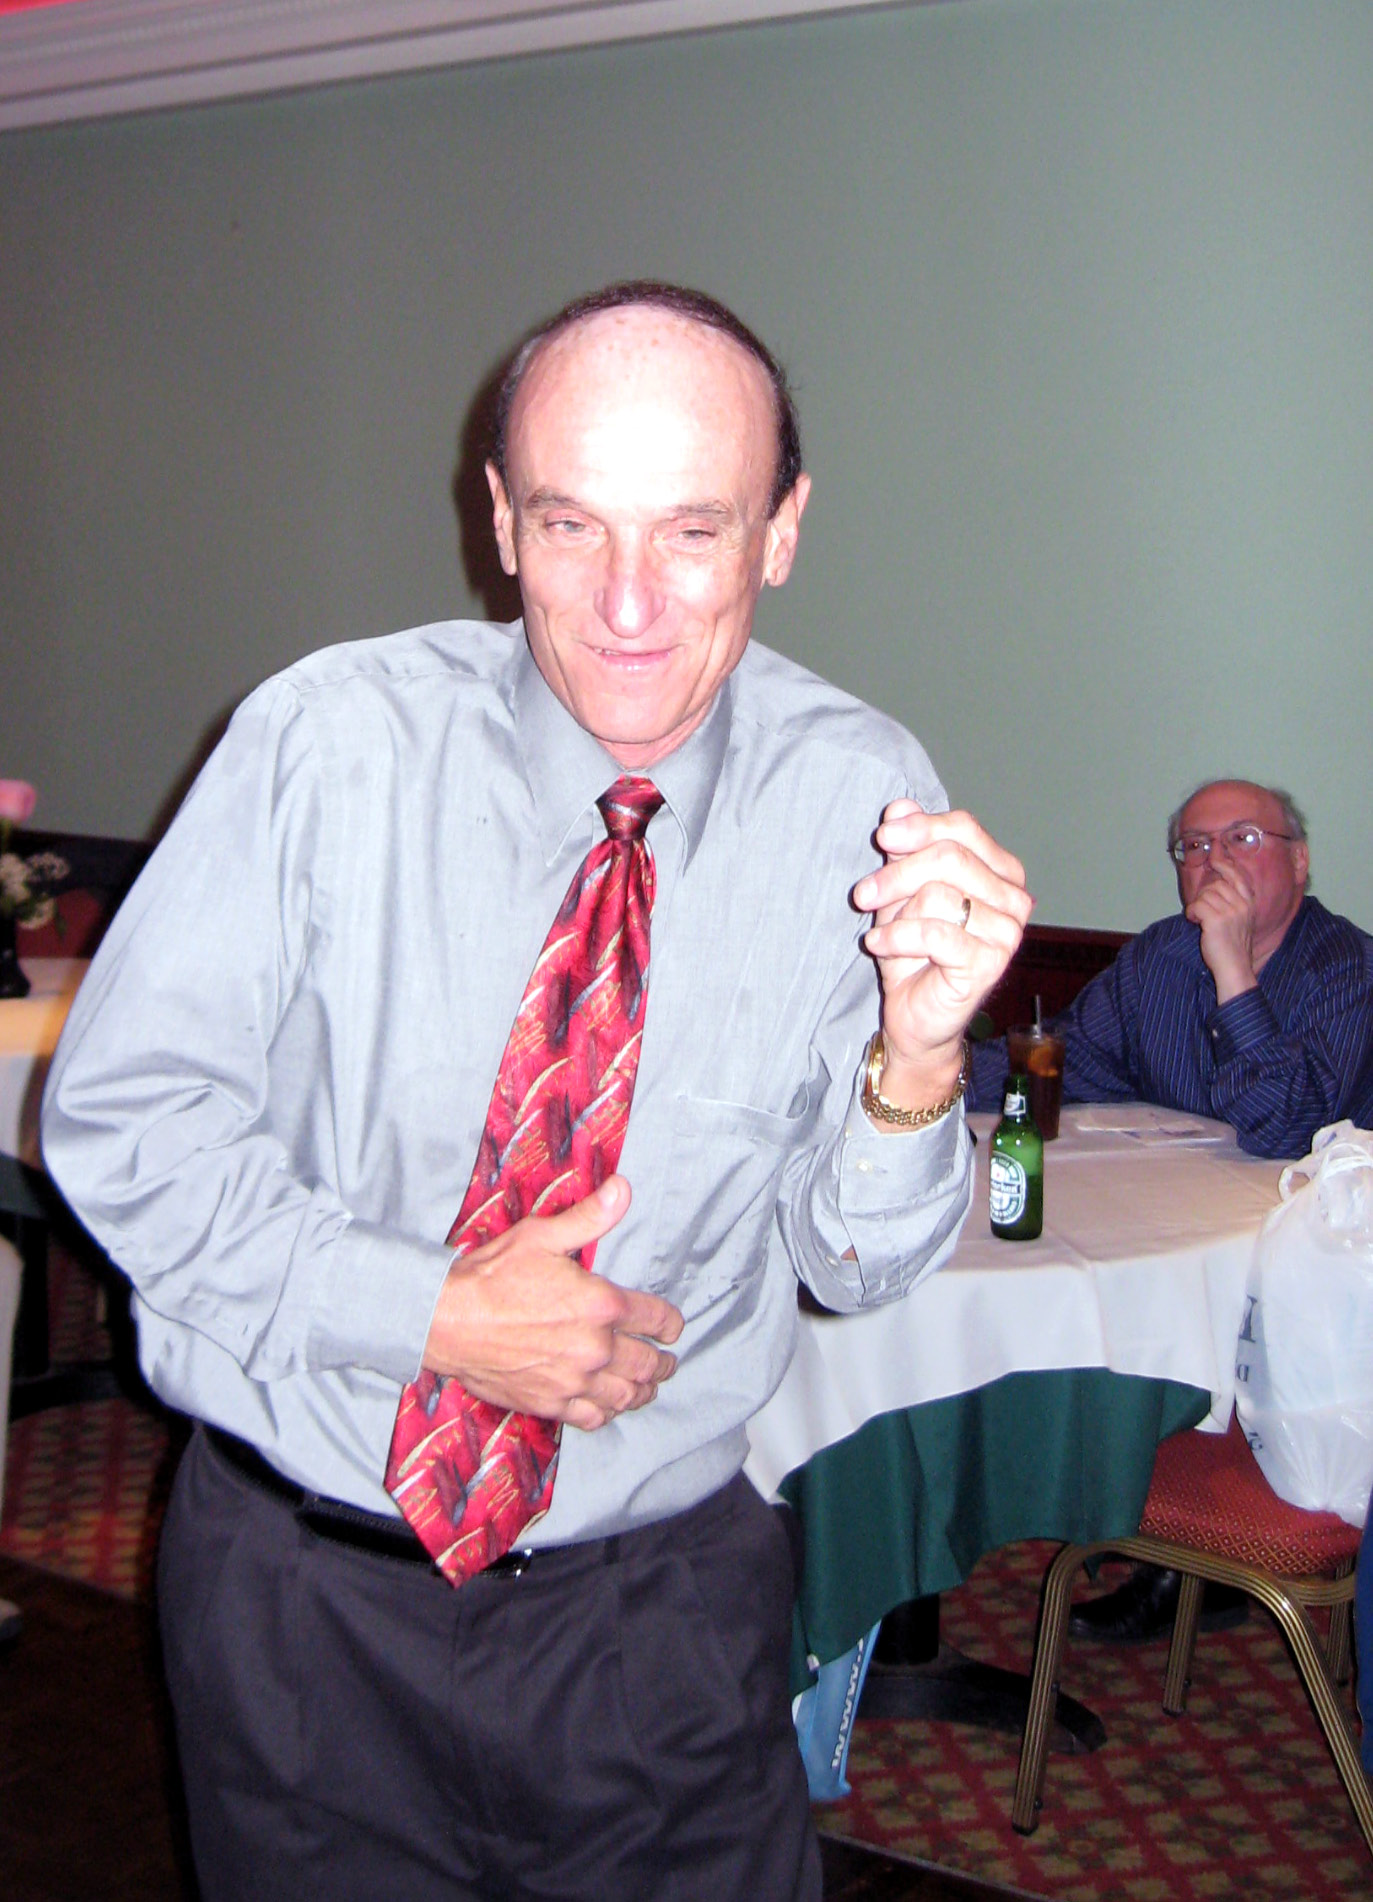 Lenny Purzner celebrating the promotions